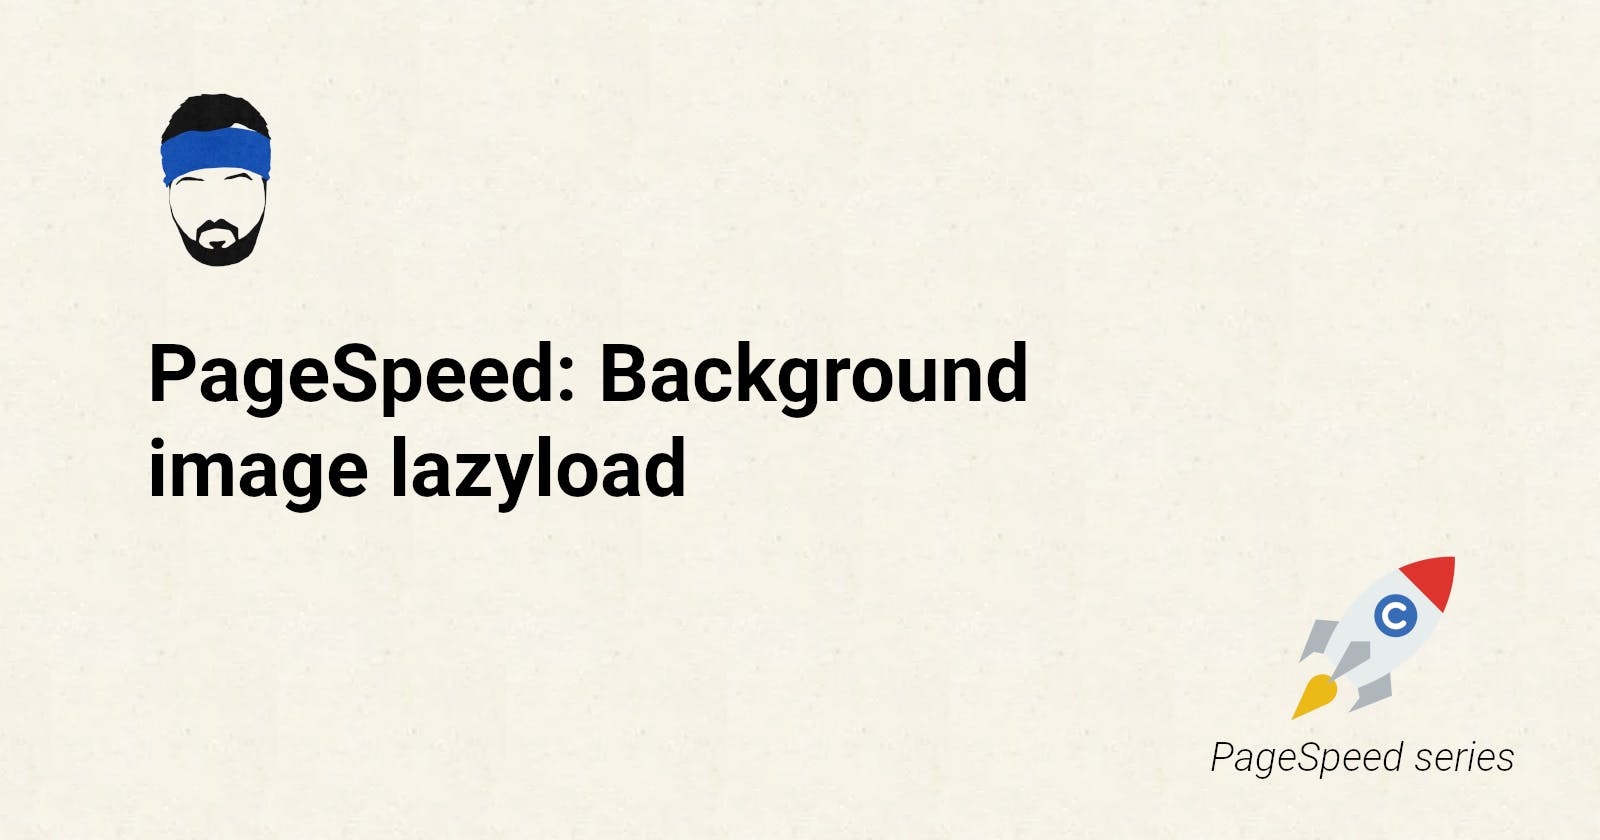 PageSpeed: Background image lazyload